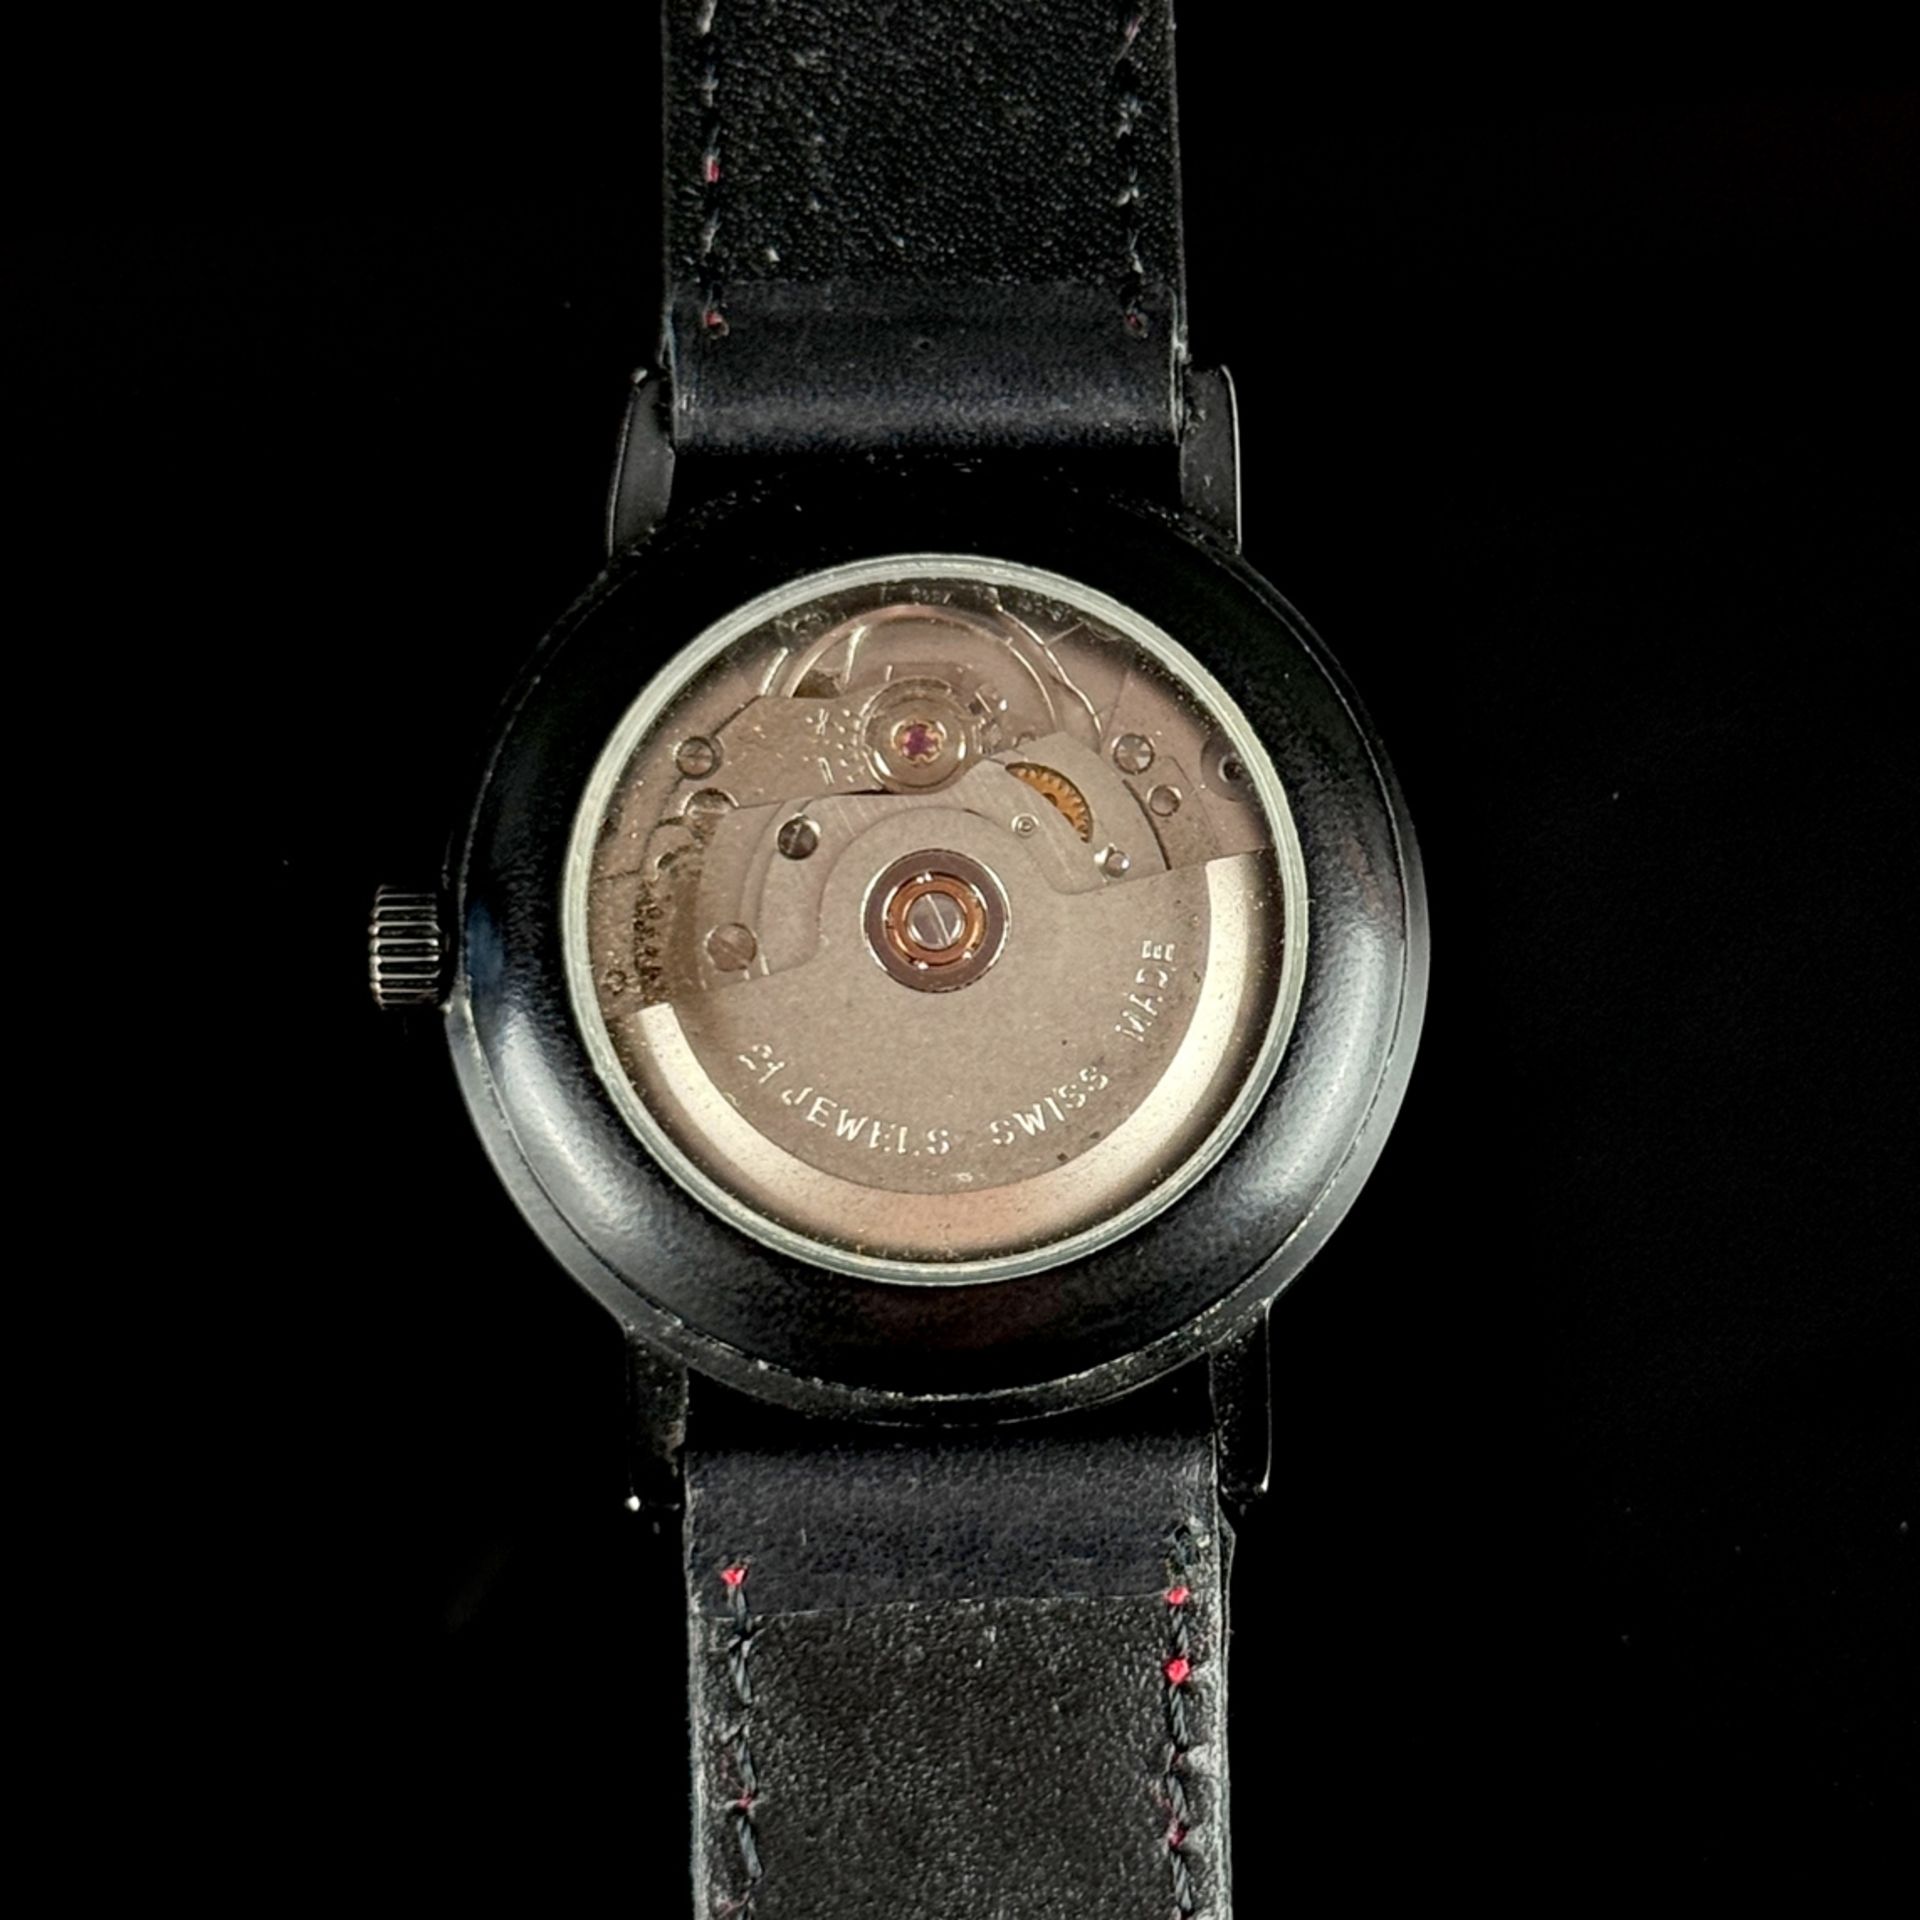 Wristwatch "Unicredit Suisse", automatic, plain black dial, date display at number 3, gold bar 1g f - Image 3 of 3